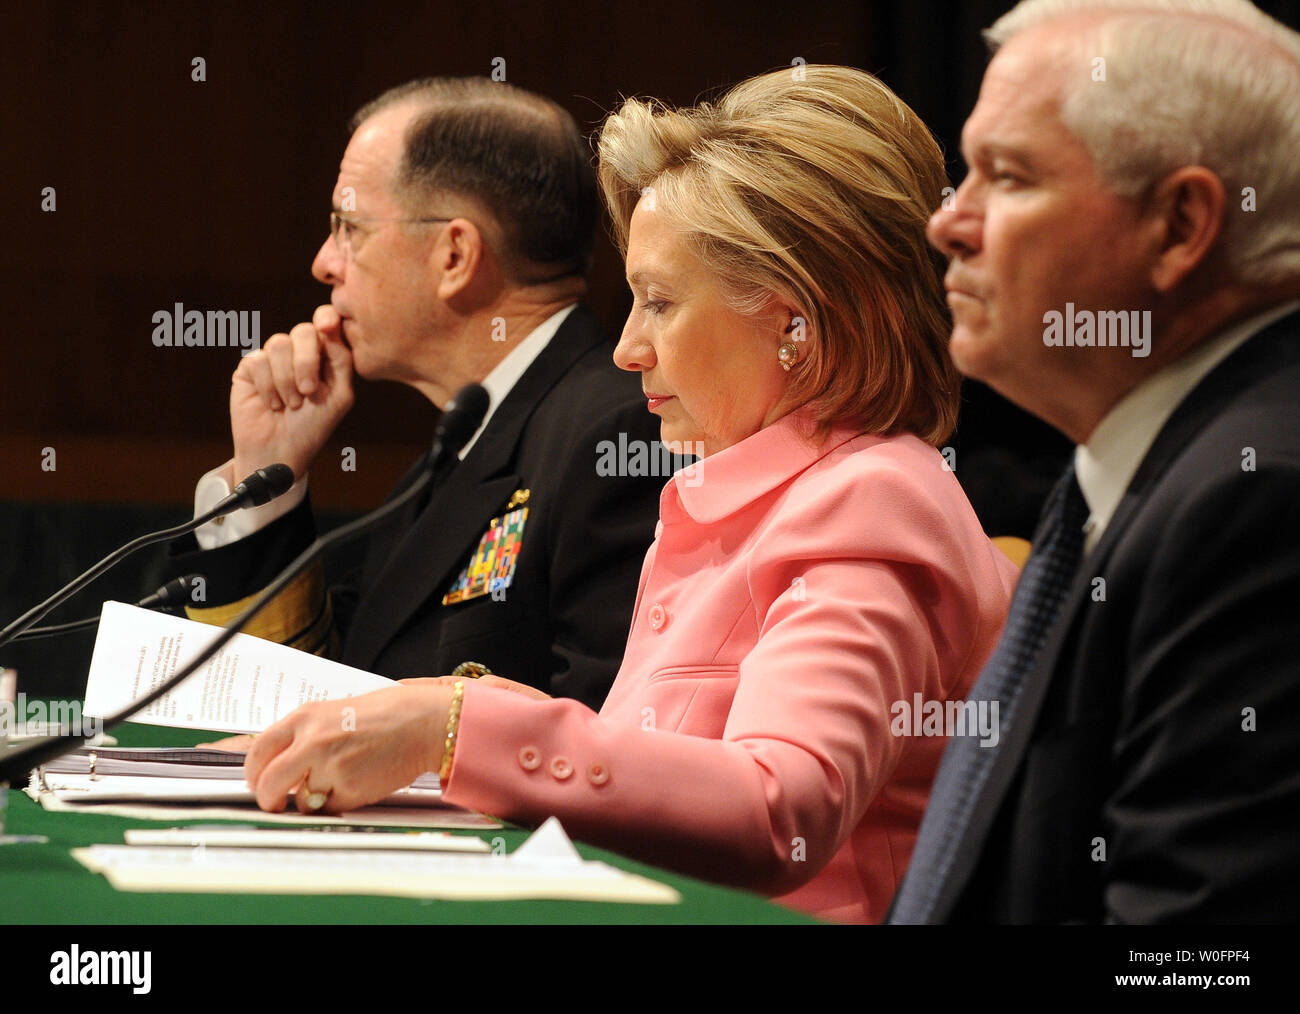 Chairman of the Joint Chiefs of Staff Adm. Michael Mullen, Secretary of State Hillary Rodham Clinton and Secretary of Defense Robert Gates (L to R) testify before the Senate Foreign Relations Committee regarding the new START treaty on Capitol Hill in Washington on May 18, 2010. The Strategic Arms Reduction Treaty (START) between the U.S. and Russia, aimed at reducing nuclear arms, was signed in Prague on April 8, 2010.   UPI/Roger L. Wollenberg Stock Photo